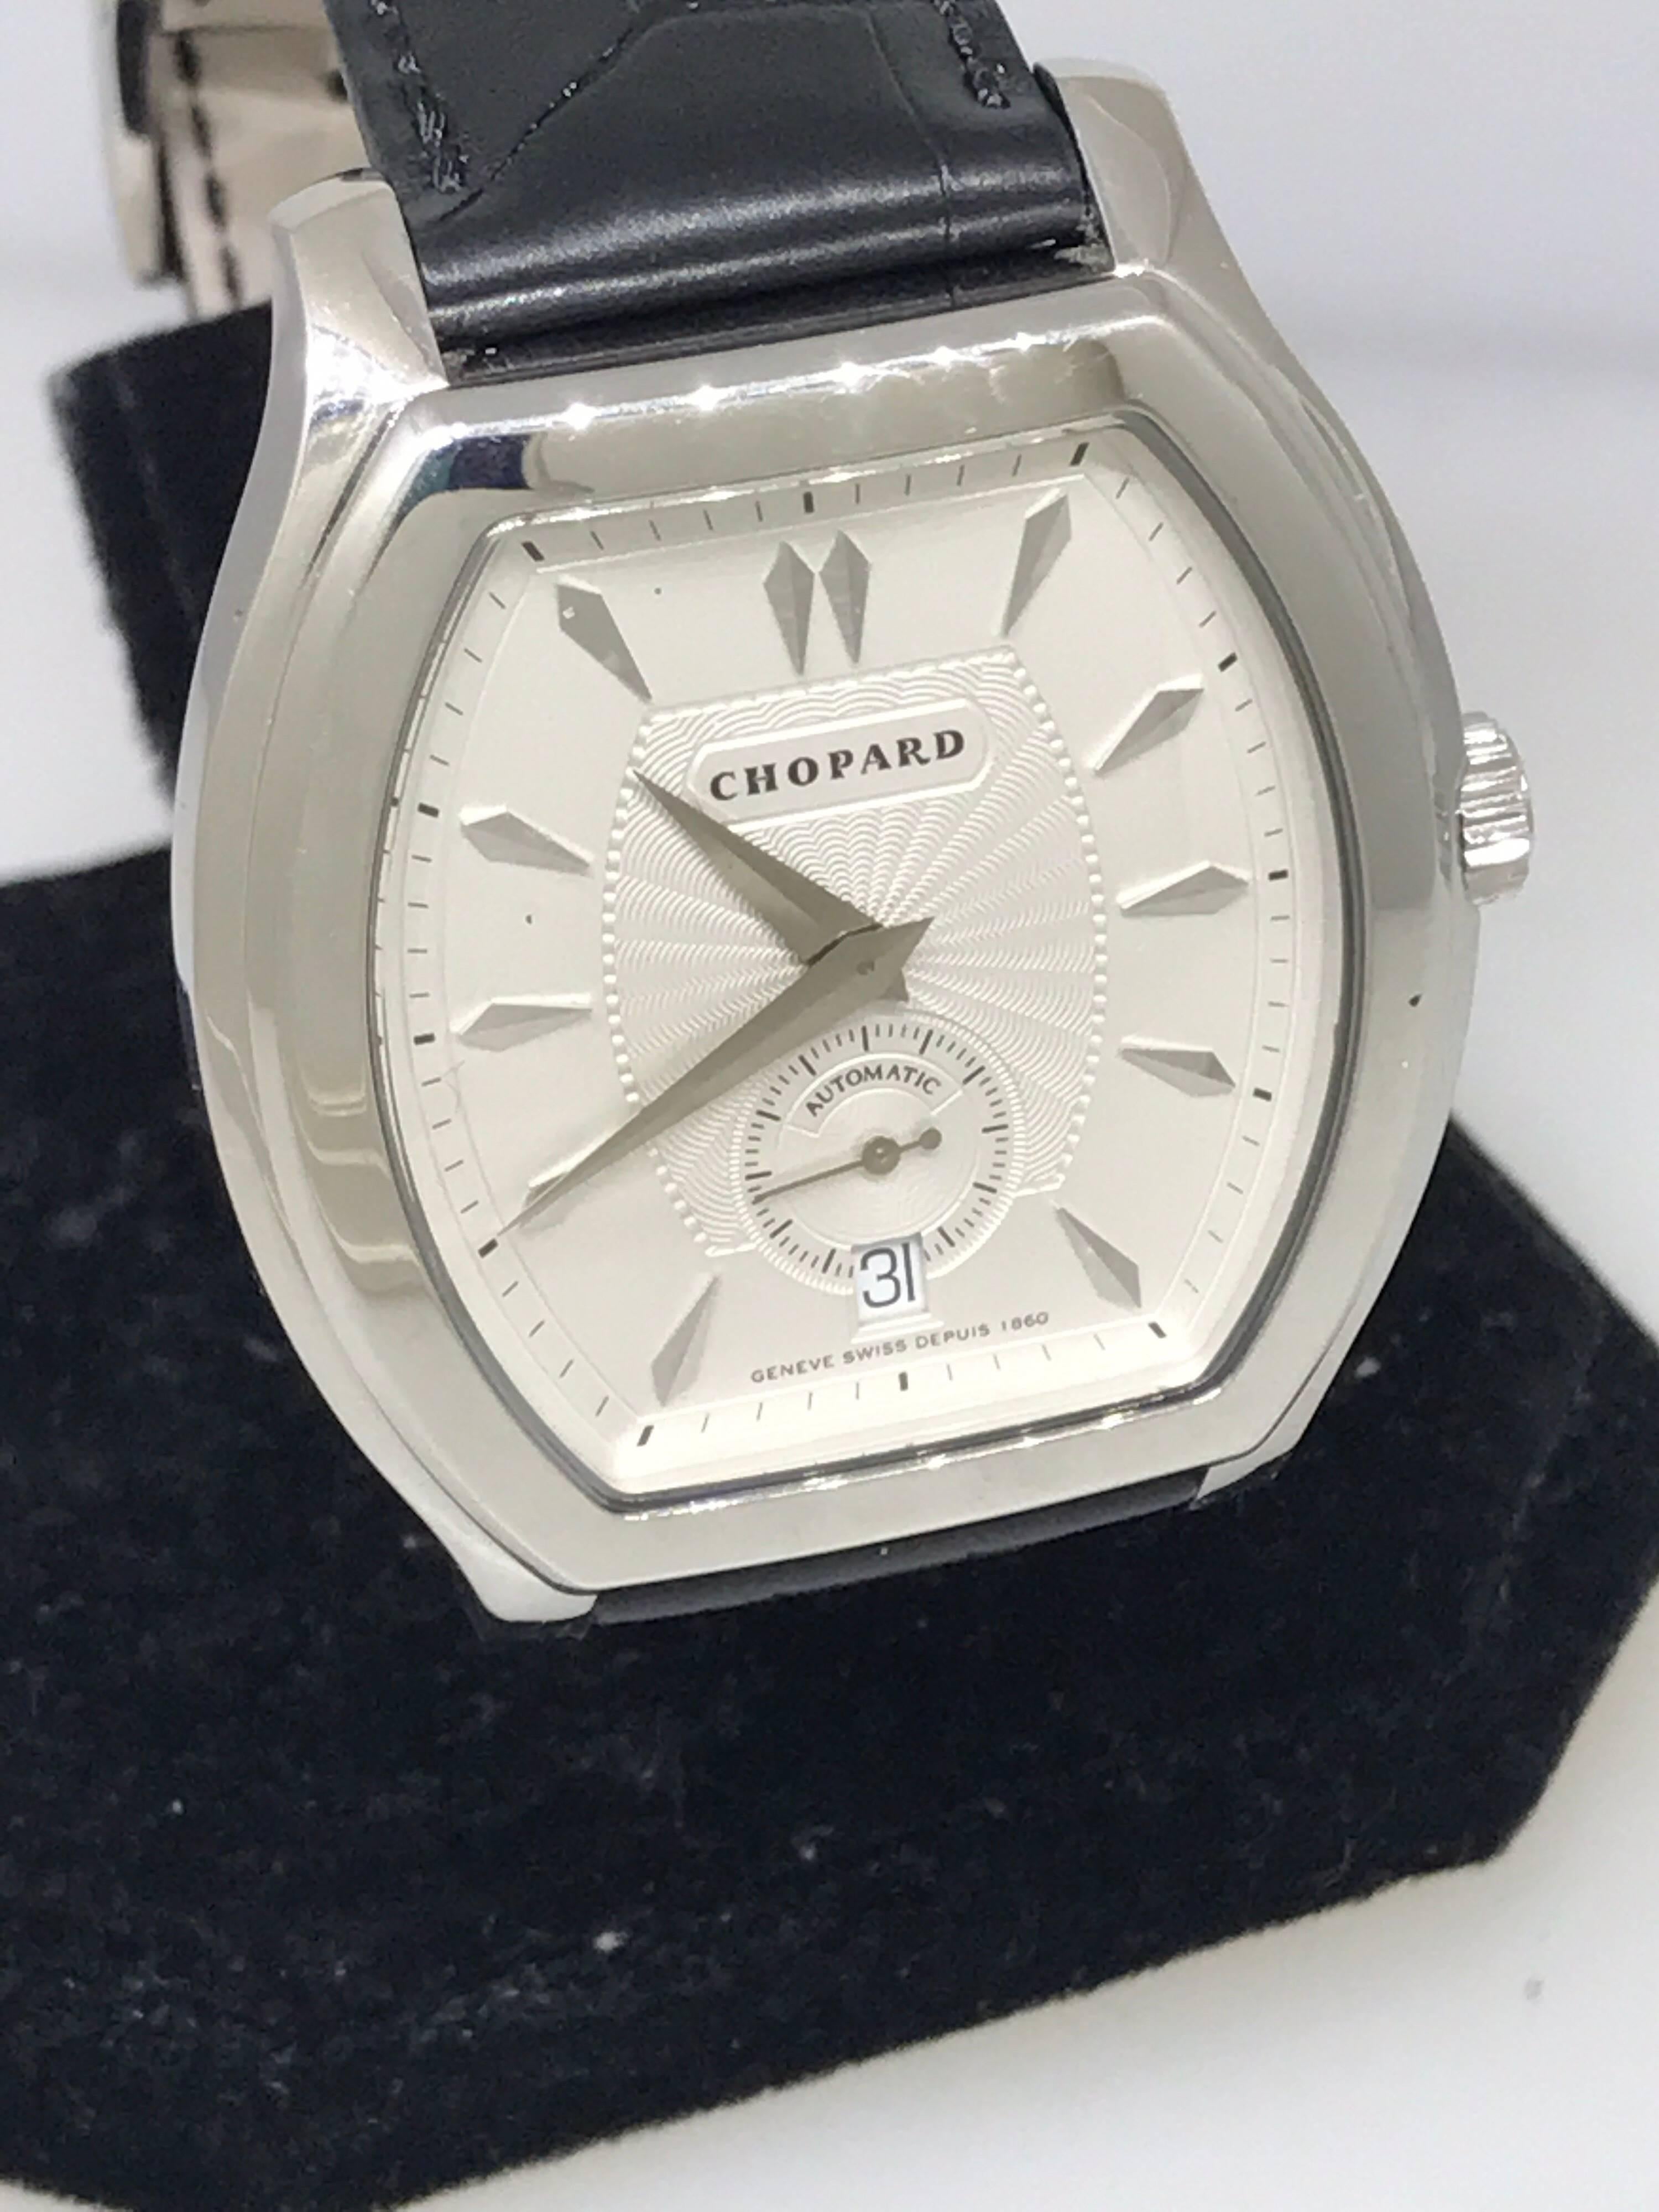 Chopard L.U.C. Prince Foundation Watch

Model Number: 16/2267

Limited Edition to 1860 Pieces

100% Authentic

New (Old Stock)

Comes with original Chopard box and instruction manual

18 Karat White Gold

Sapphire Crystal

Silver Guilloche